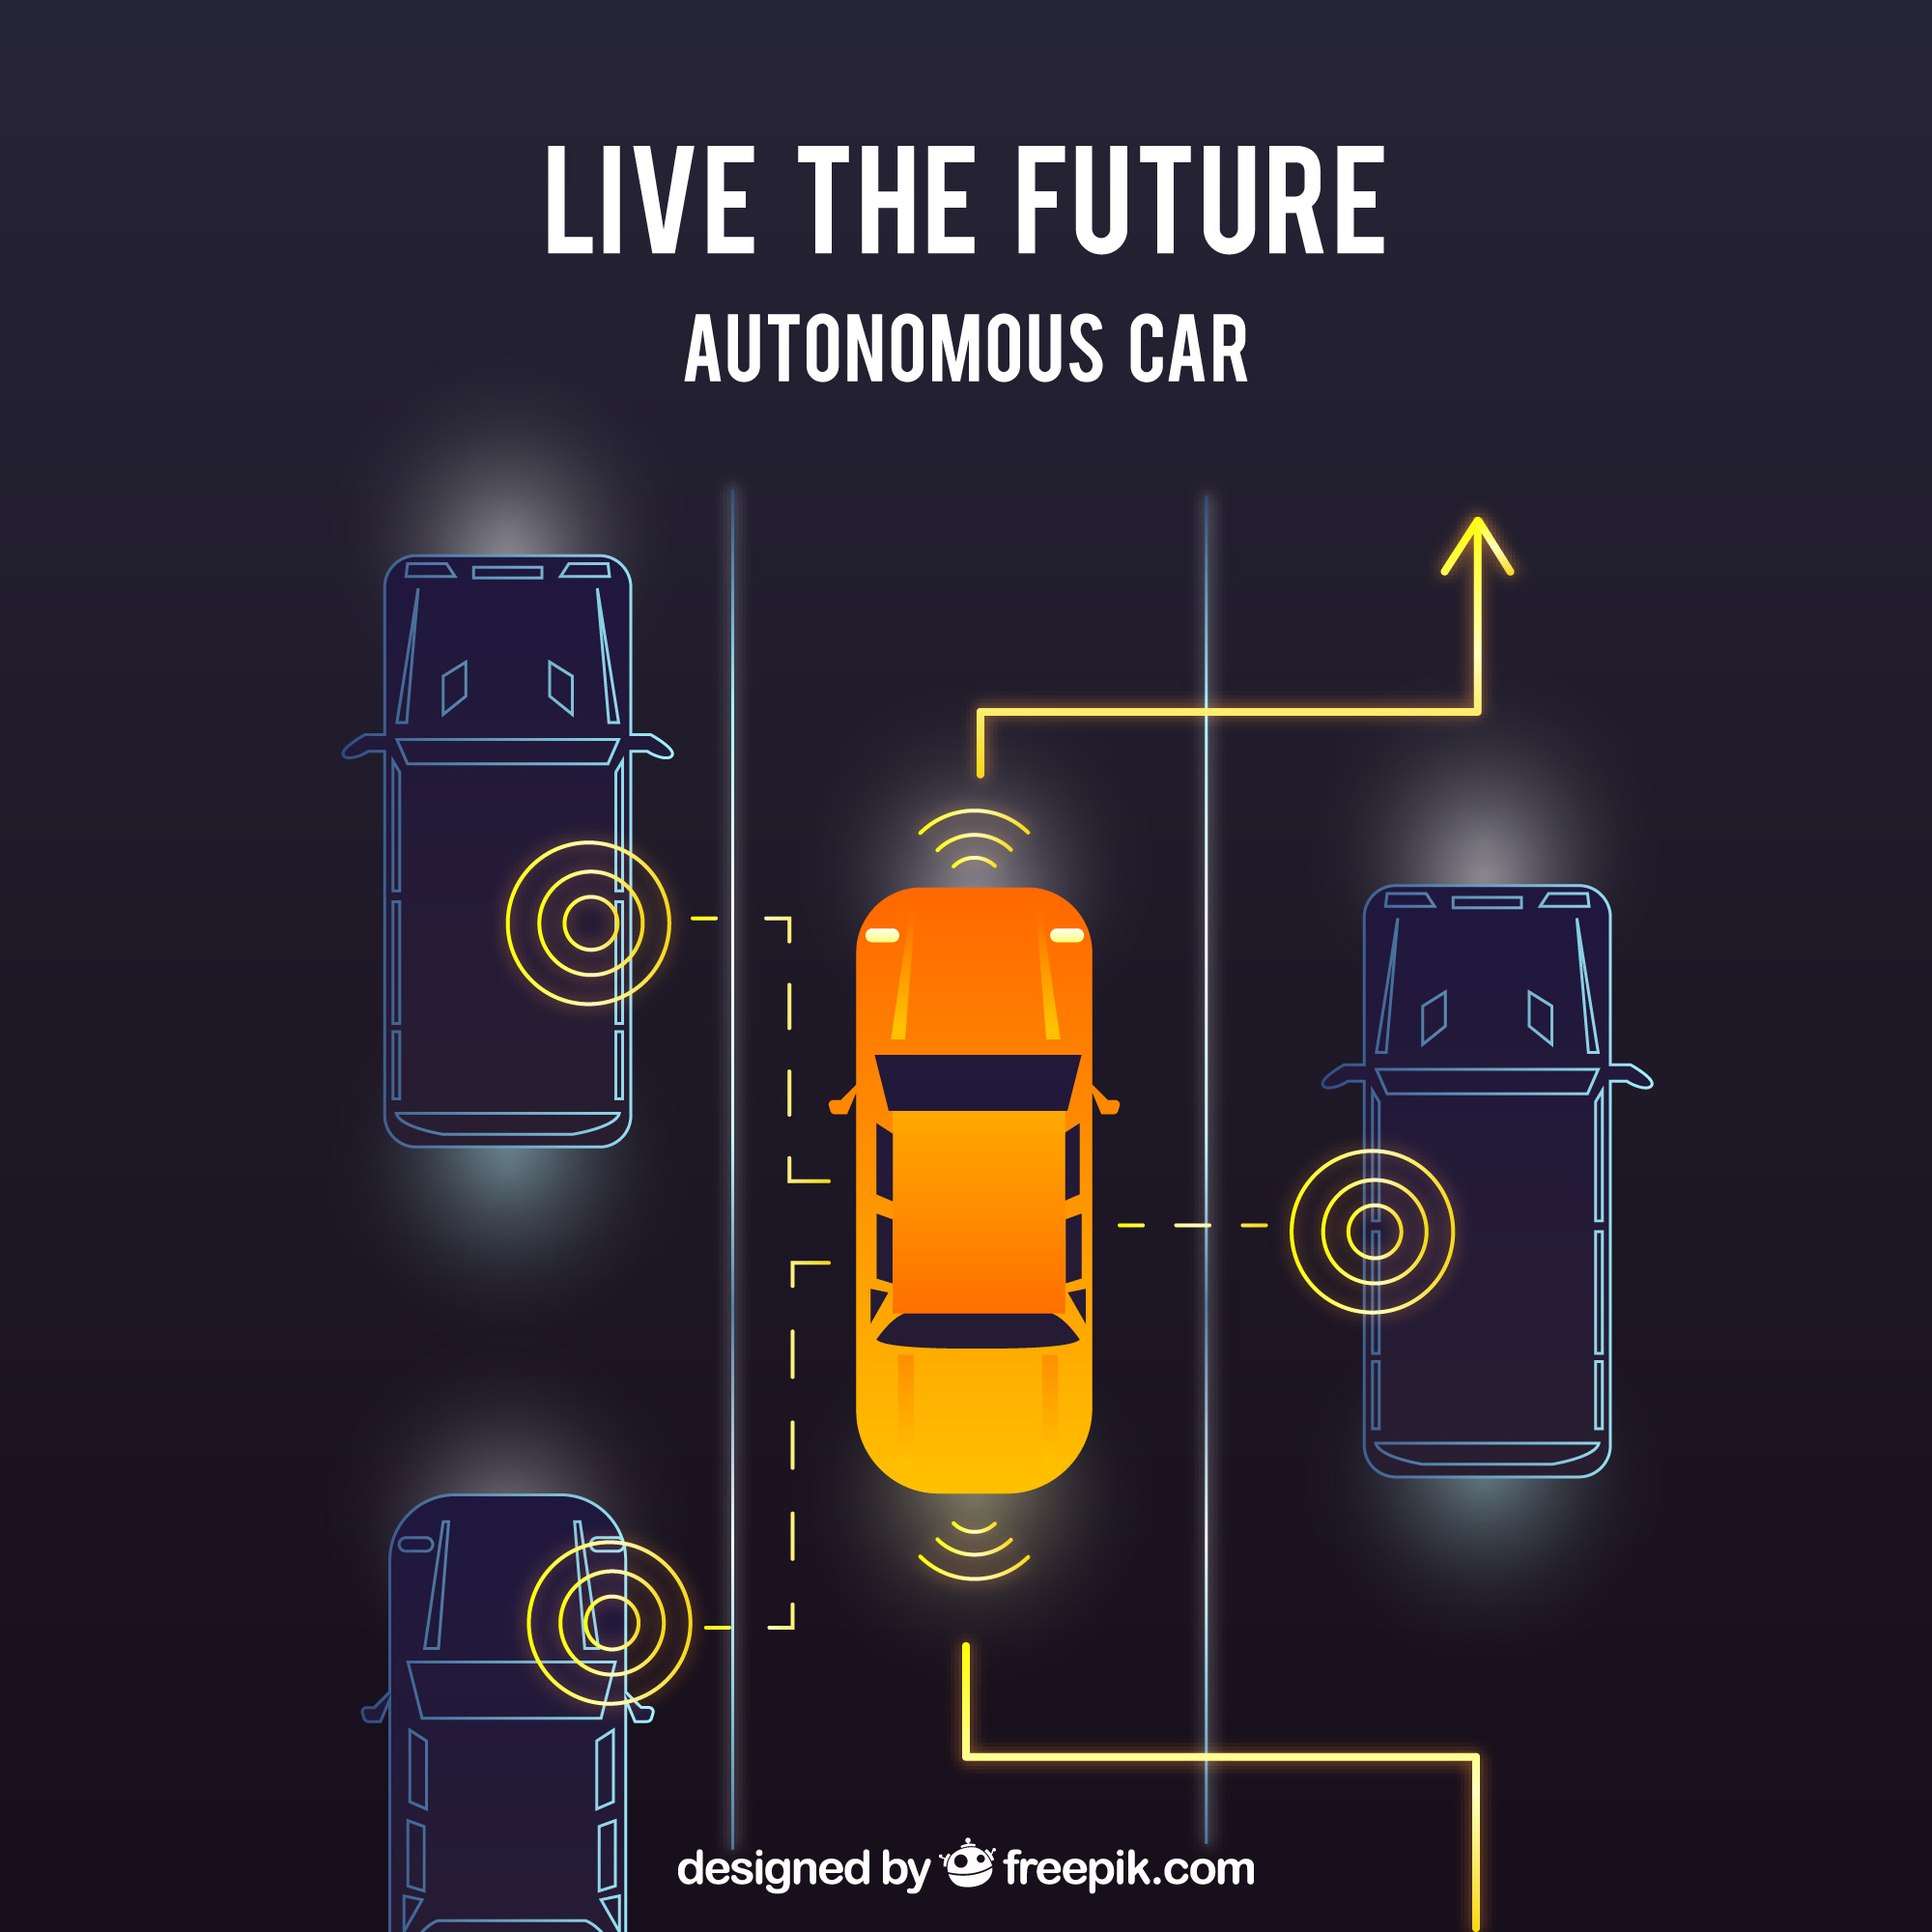 New Level 4 Autonomous Driving Regulation propels Germany to driverless mobility 1